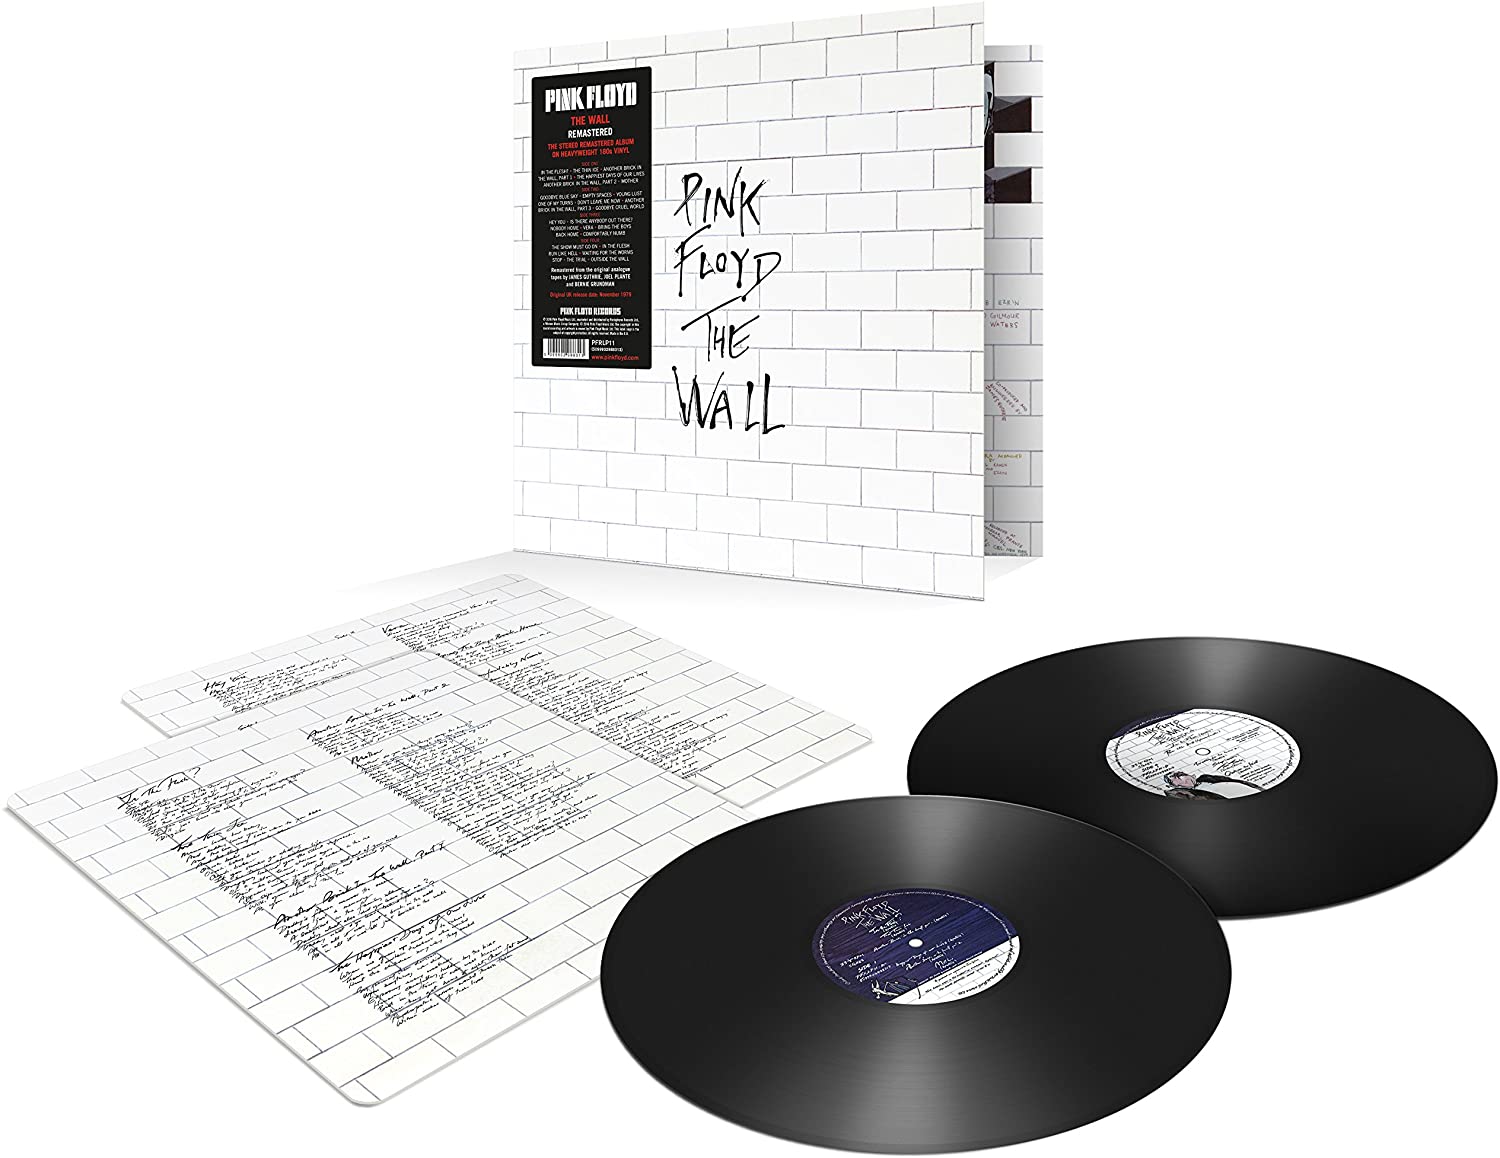 The eleventh studio album on Vinyl by Pink Floyd. It is a rock opera that explores Pink, a jaded rockstar whose eventual self-imposed isolation from society is symbolized by a wall. Features the singles 'Another Brick in the Wall, Part 2', 'Run Like Hell' and 'Comfortably Numb'.